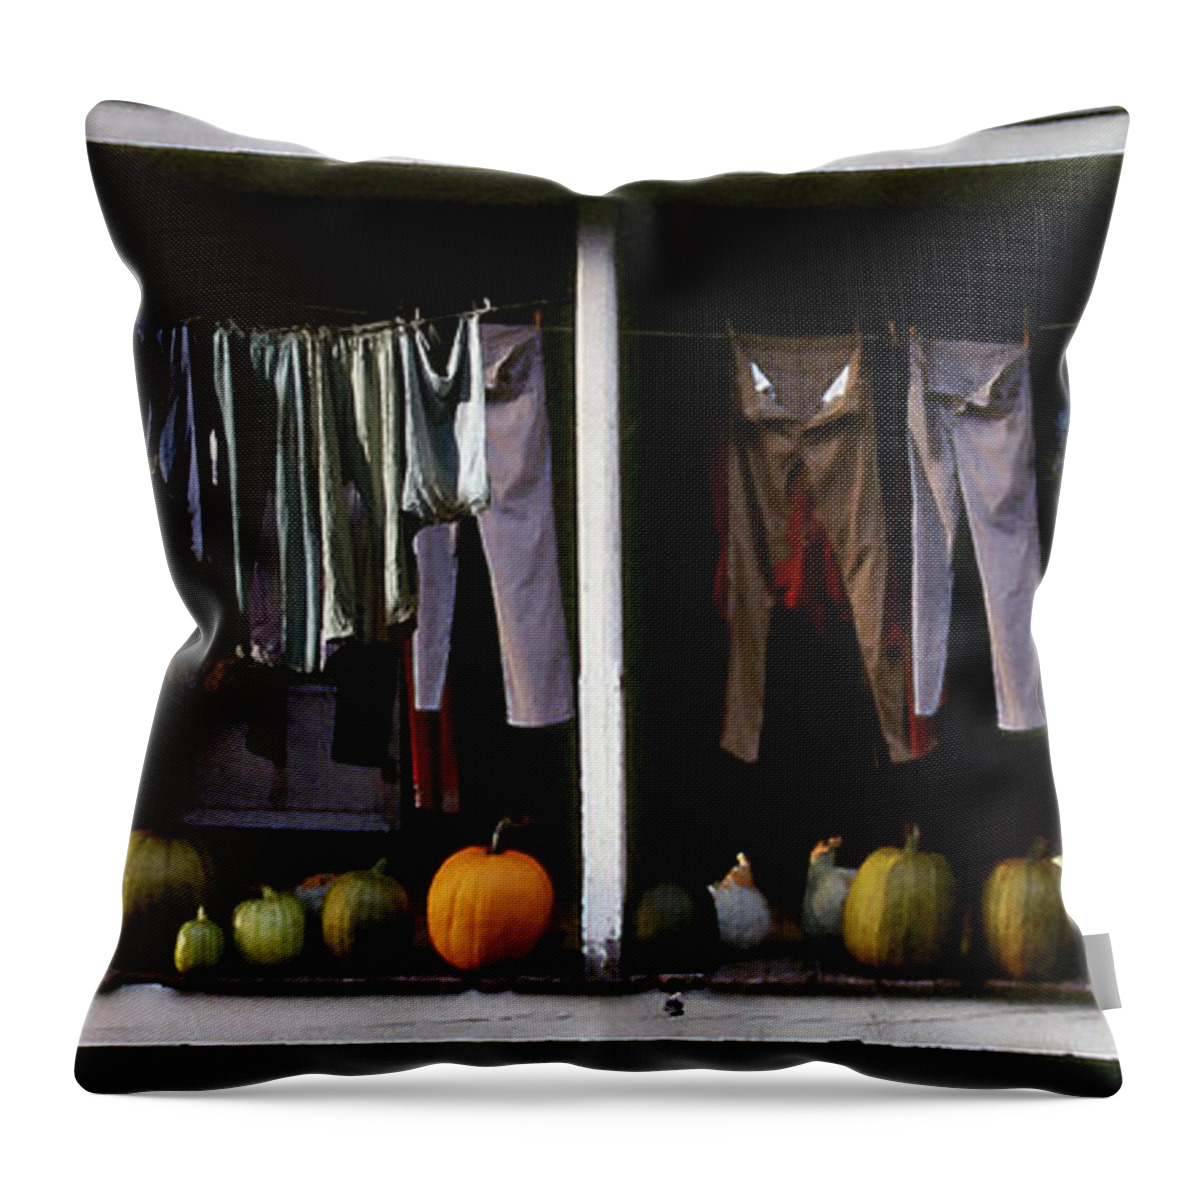 Porch Throw Pillow featuring the photograph The Country Porch by Wayne King